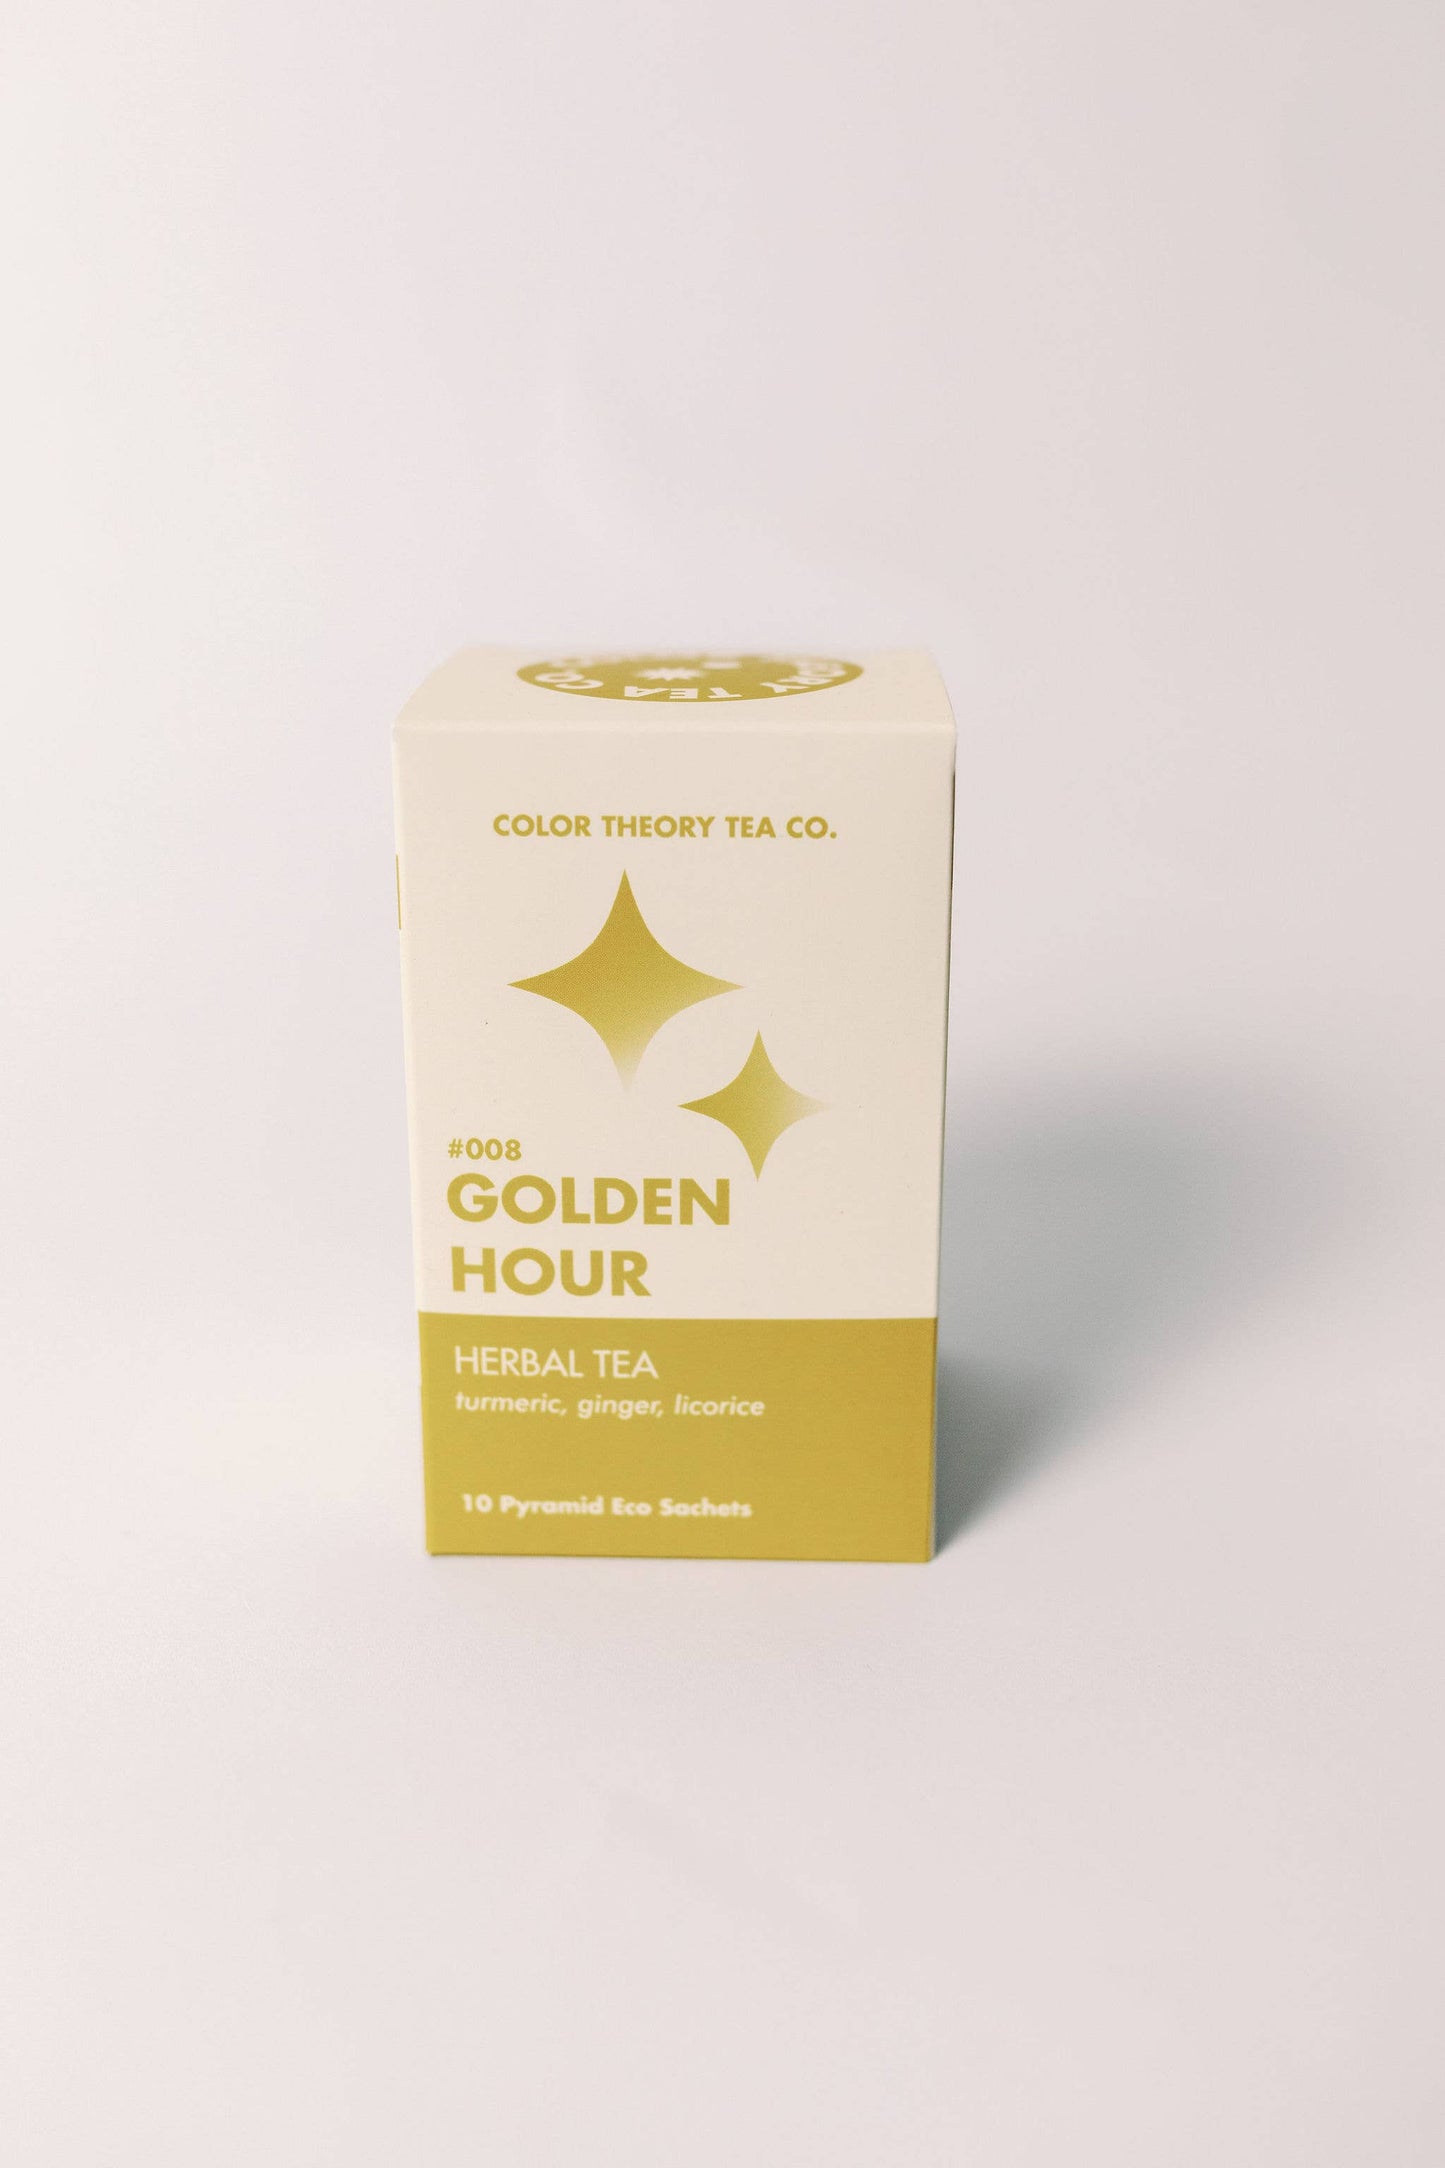 Golden Hour: Color Theory Tea Co.